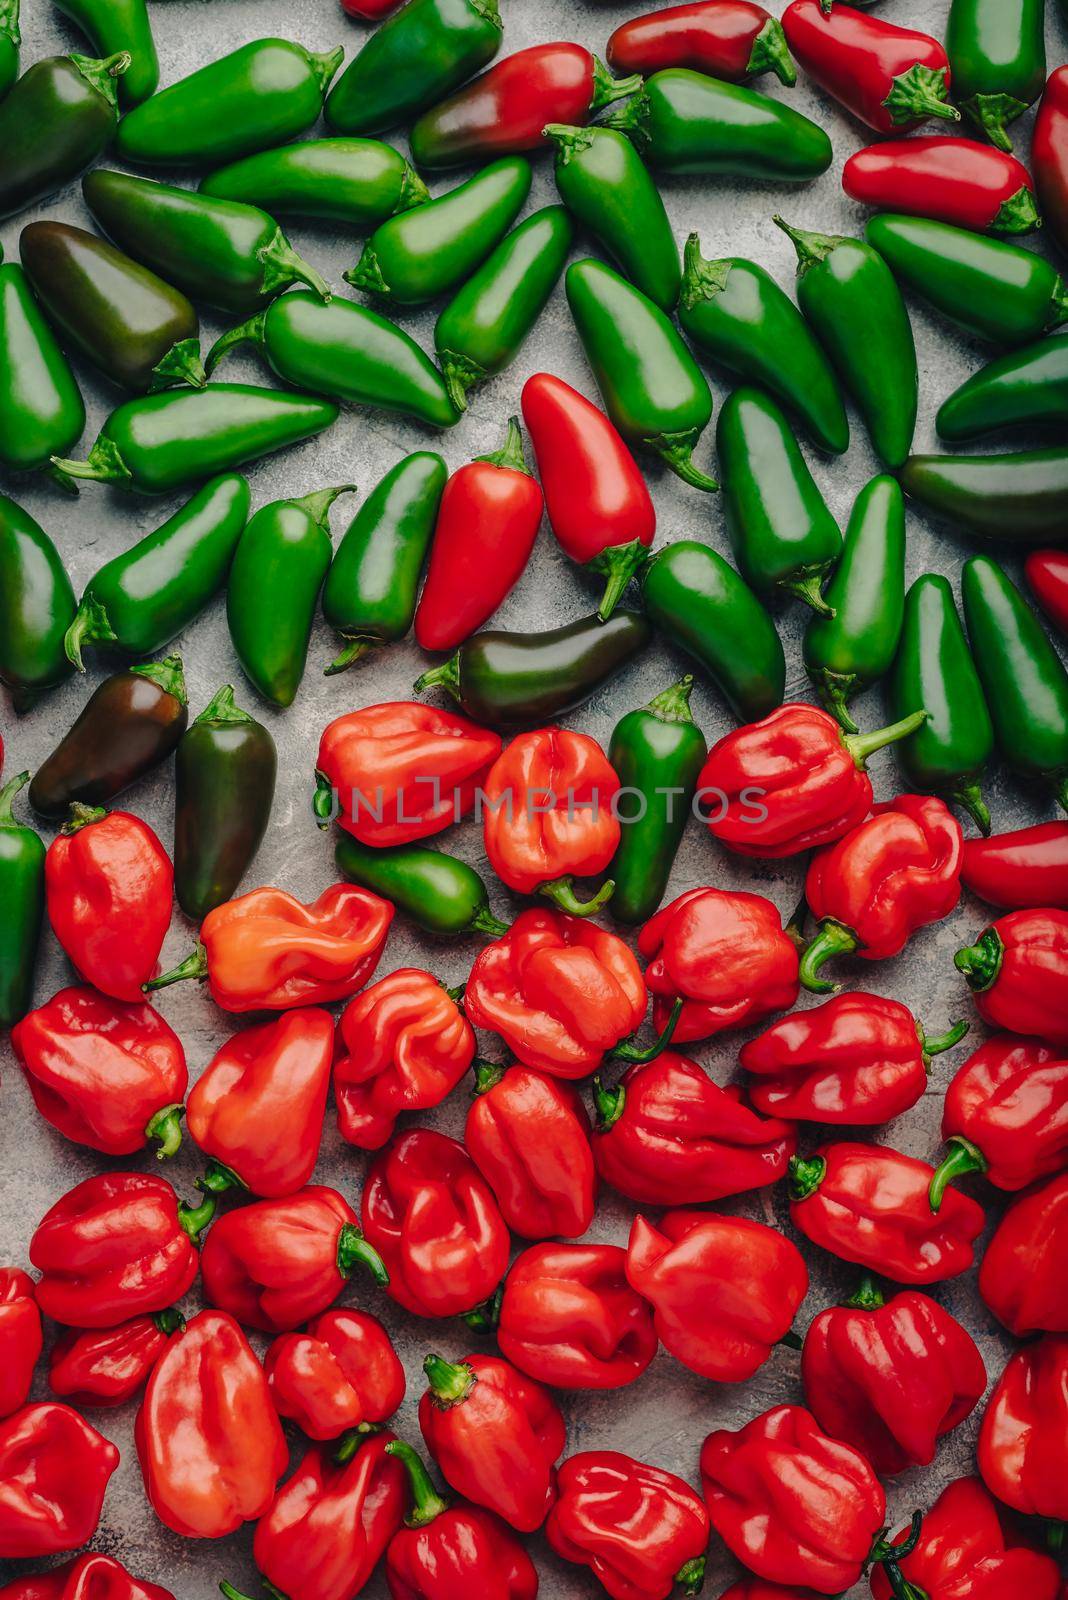 Sorted Hot Jalapeno and Habanero Peppers by Seva_blsv